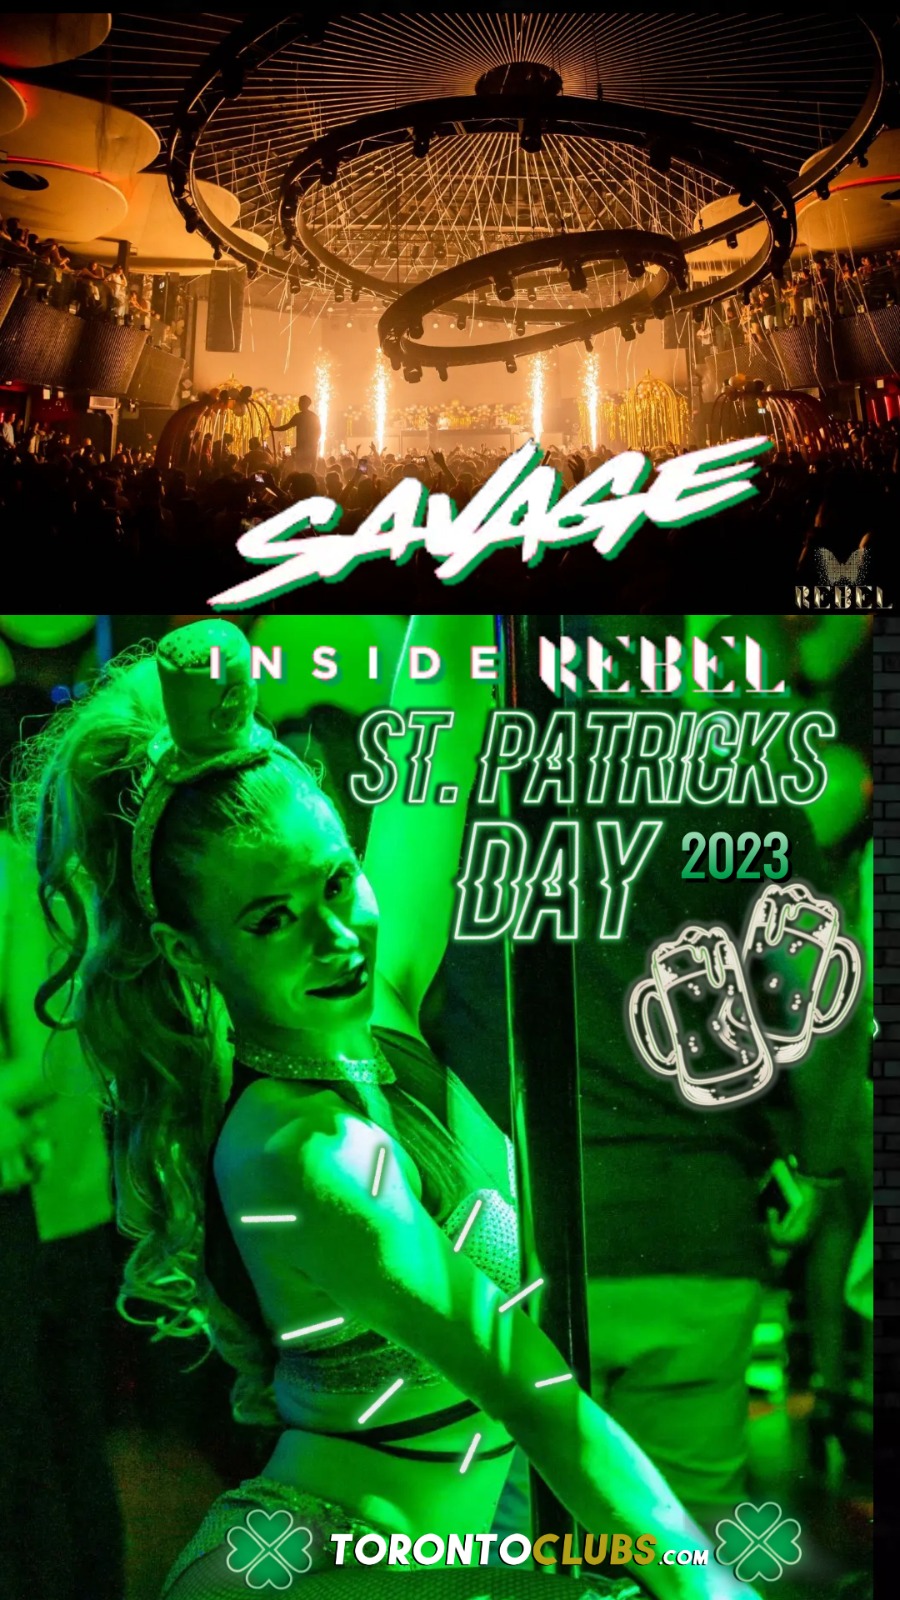 LATIN ST. PATRICK'S DAY 2023 EVENT & PARTY AT SAVAGE INSIDE REBEL TORONTO